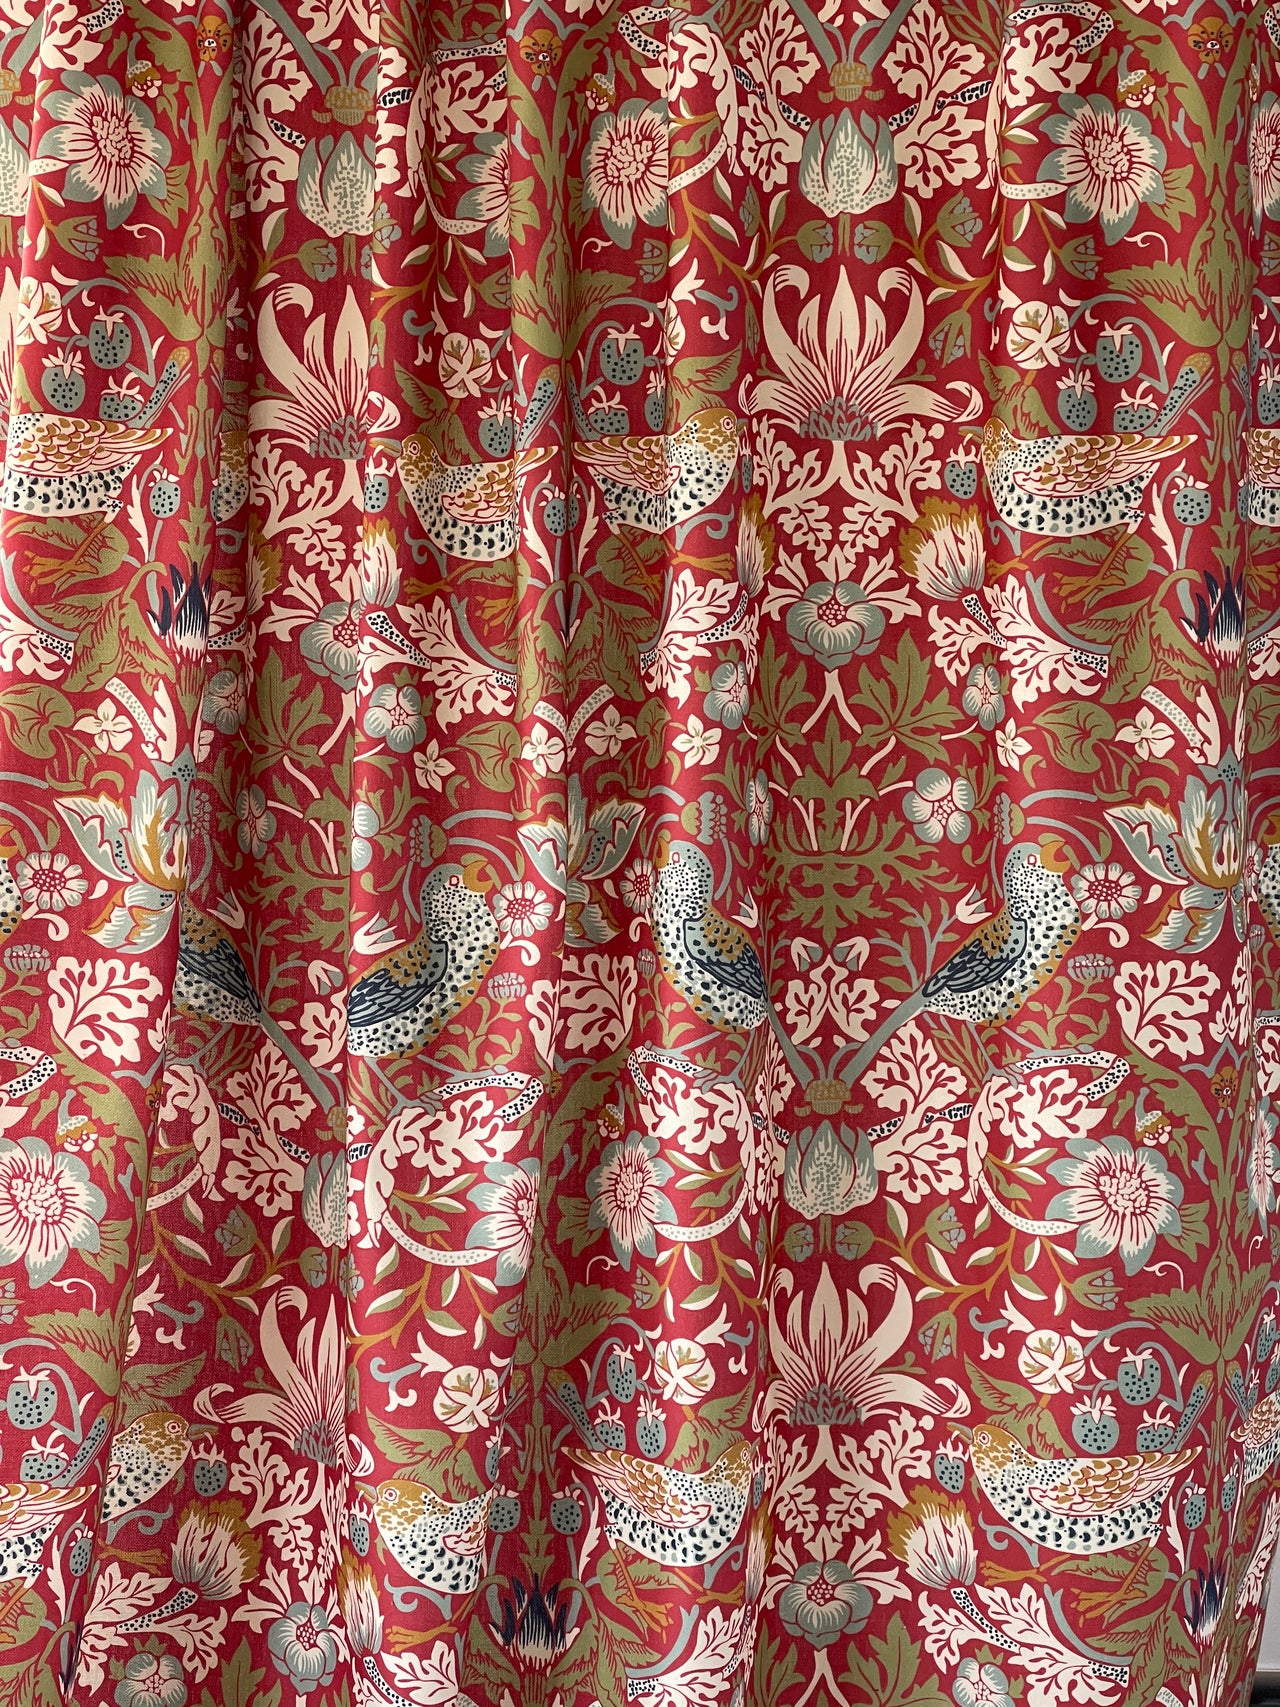 Custom William Morris Roman Blinds / Red and Green Cotton with Strawberry Thief Pattern - Made to Measure for Home Decor